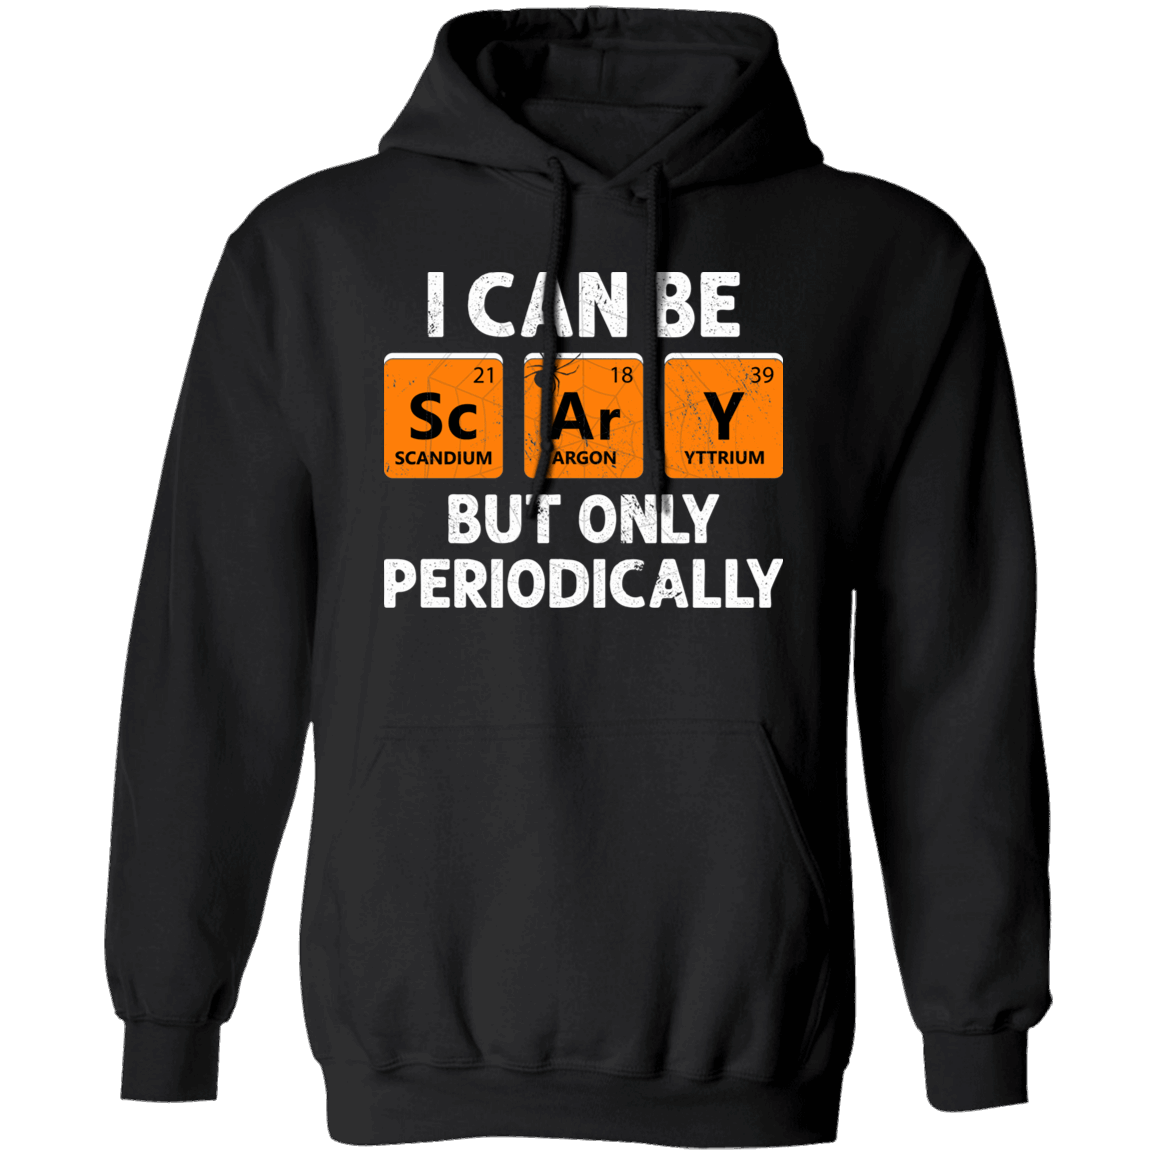 I Can Be ScArY But Only Periodically - Unisex Shirt/Hoodie